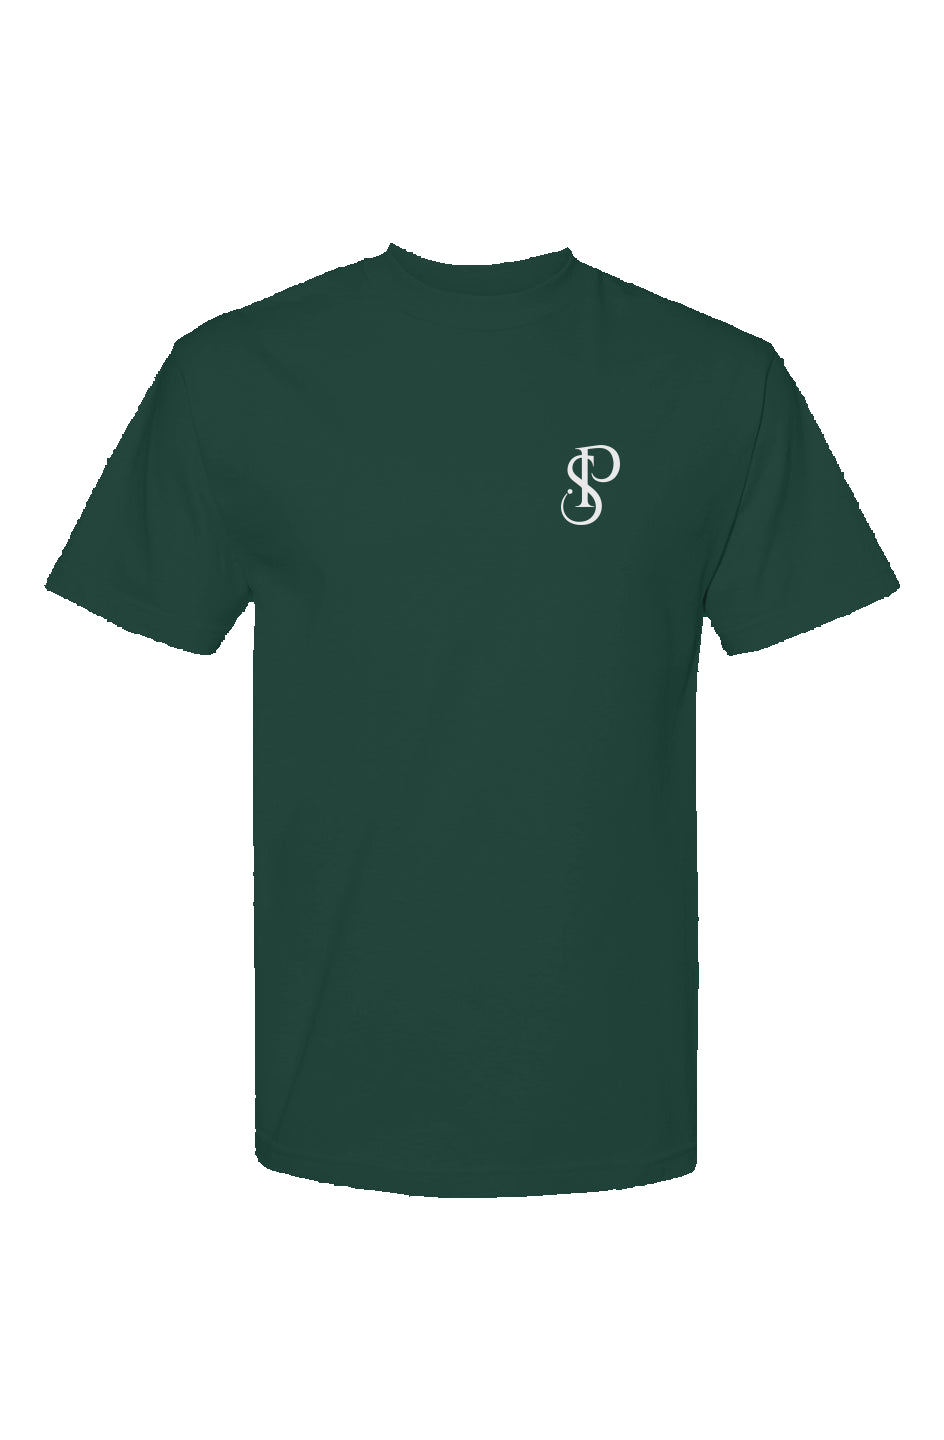 Society’s Product Classic T Shirt forest green